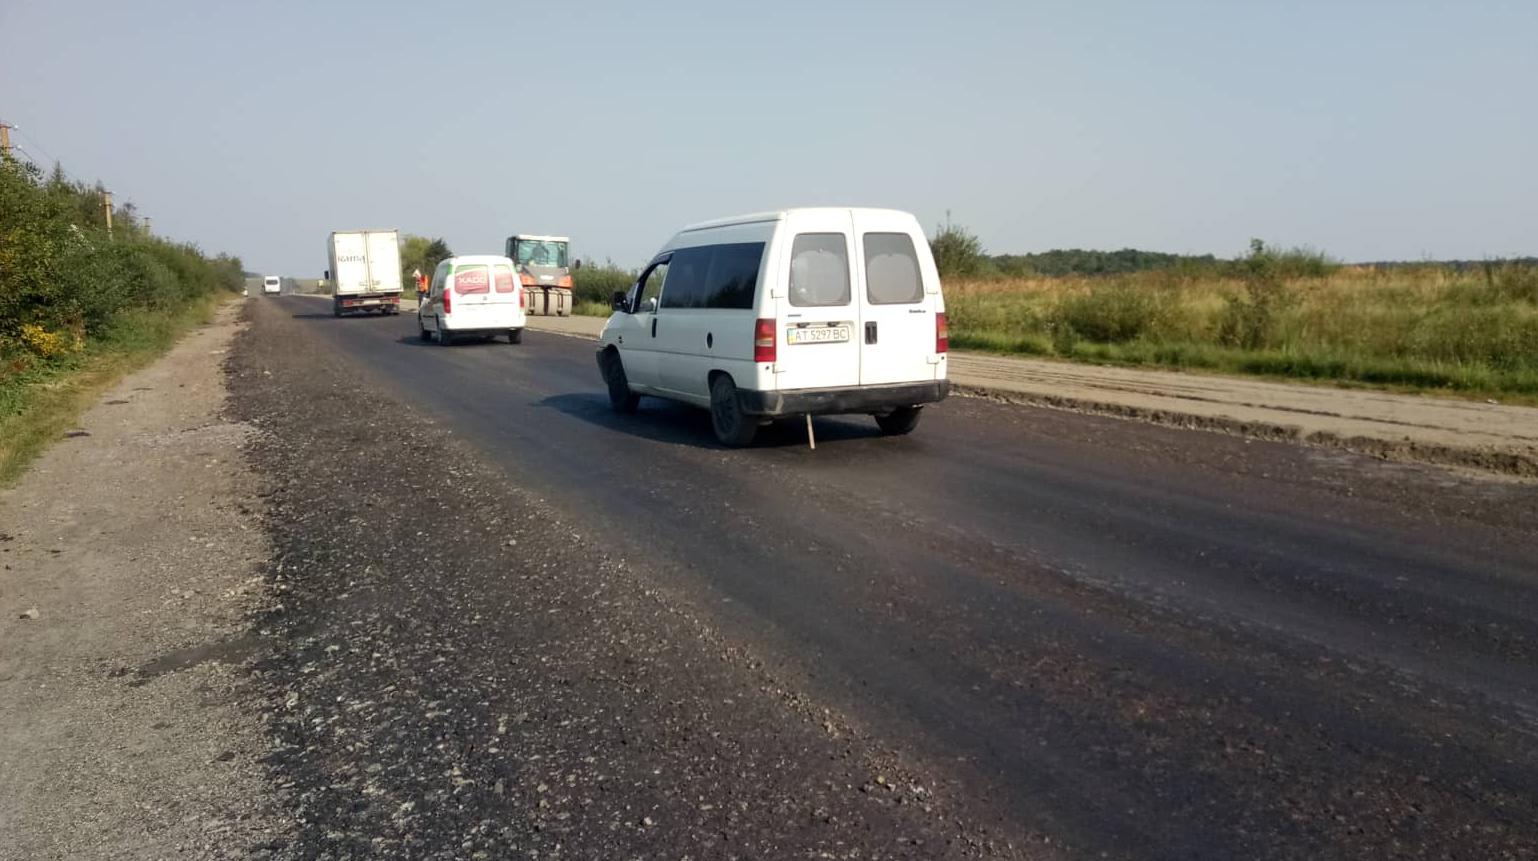 Dolyna region: PBS is arranging the road base